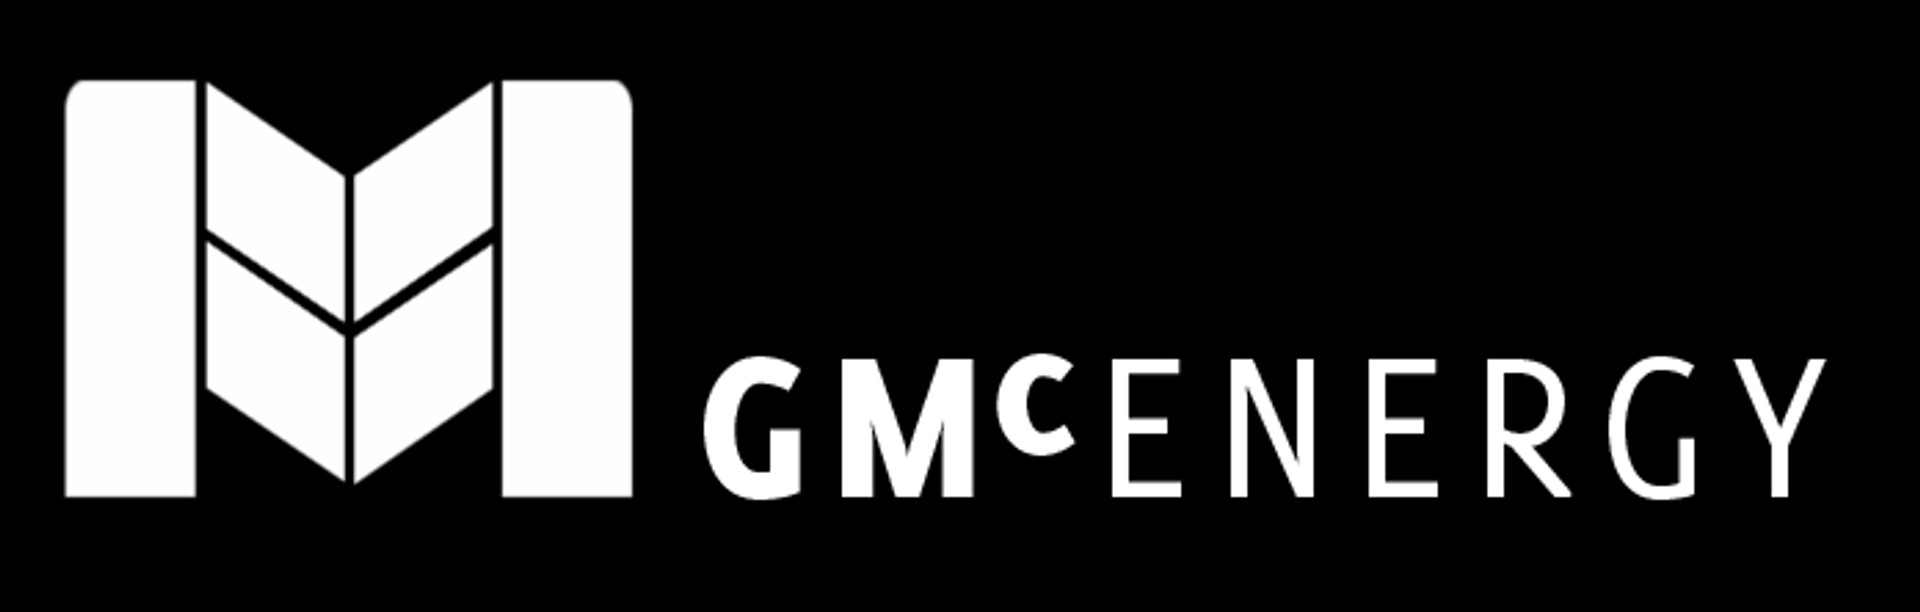 GMc Energy Limited